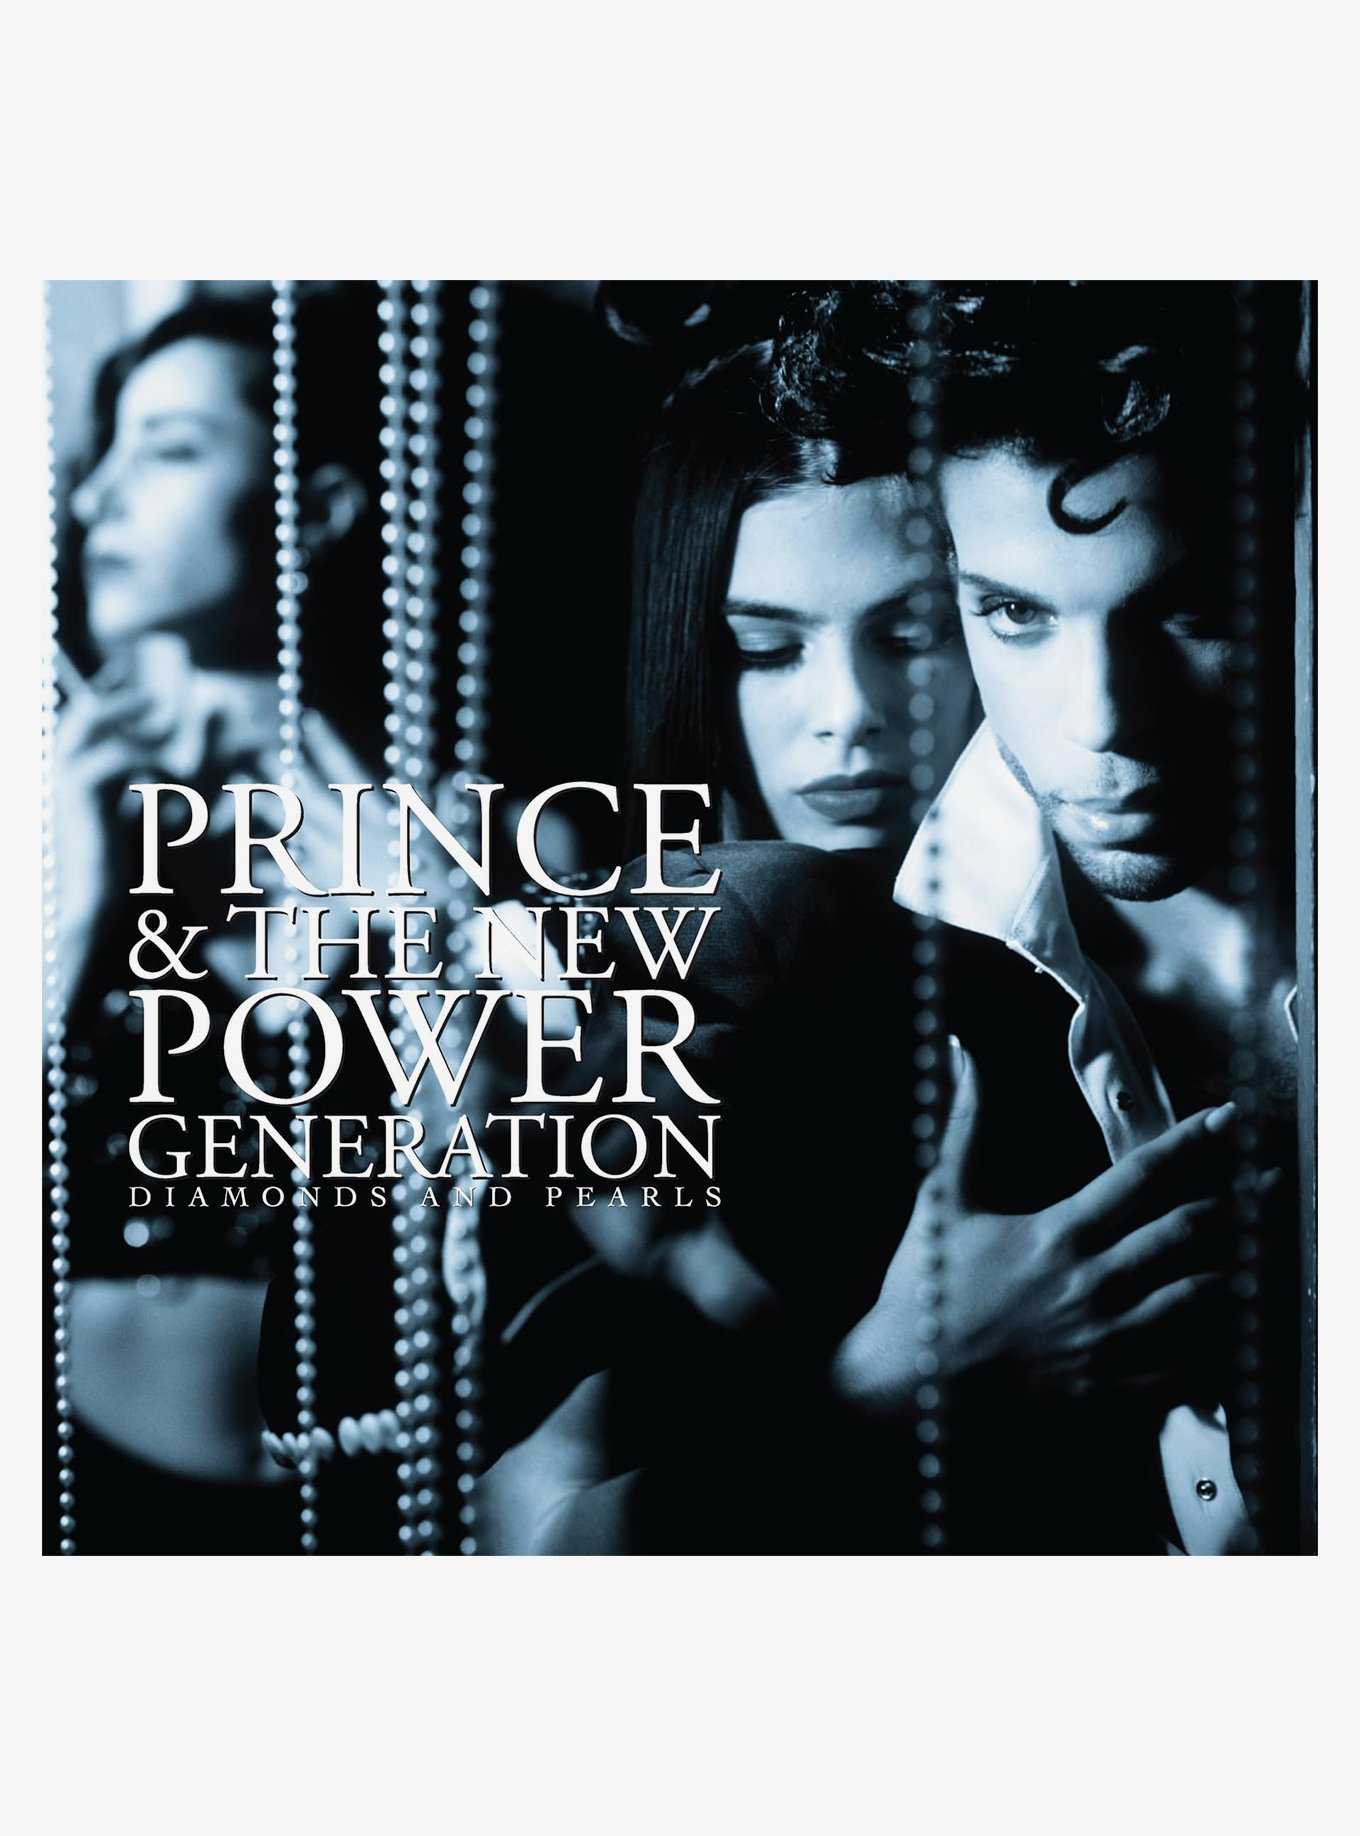 Prince & New Power Generation Diamonds And Pearls Deluxe Vinyl LP, , hi-res